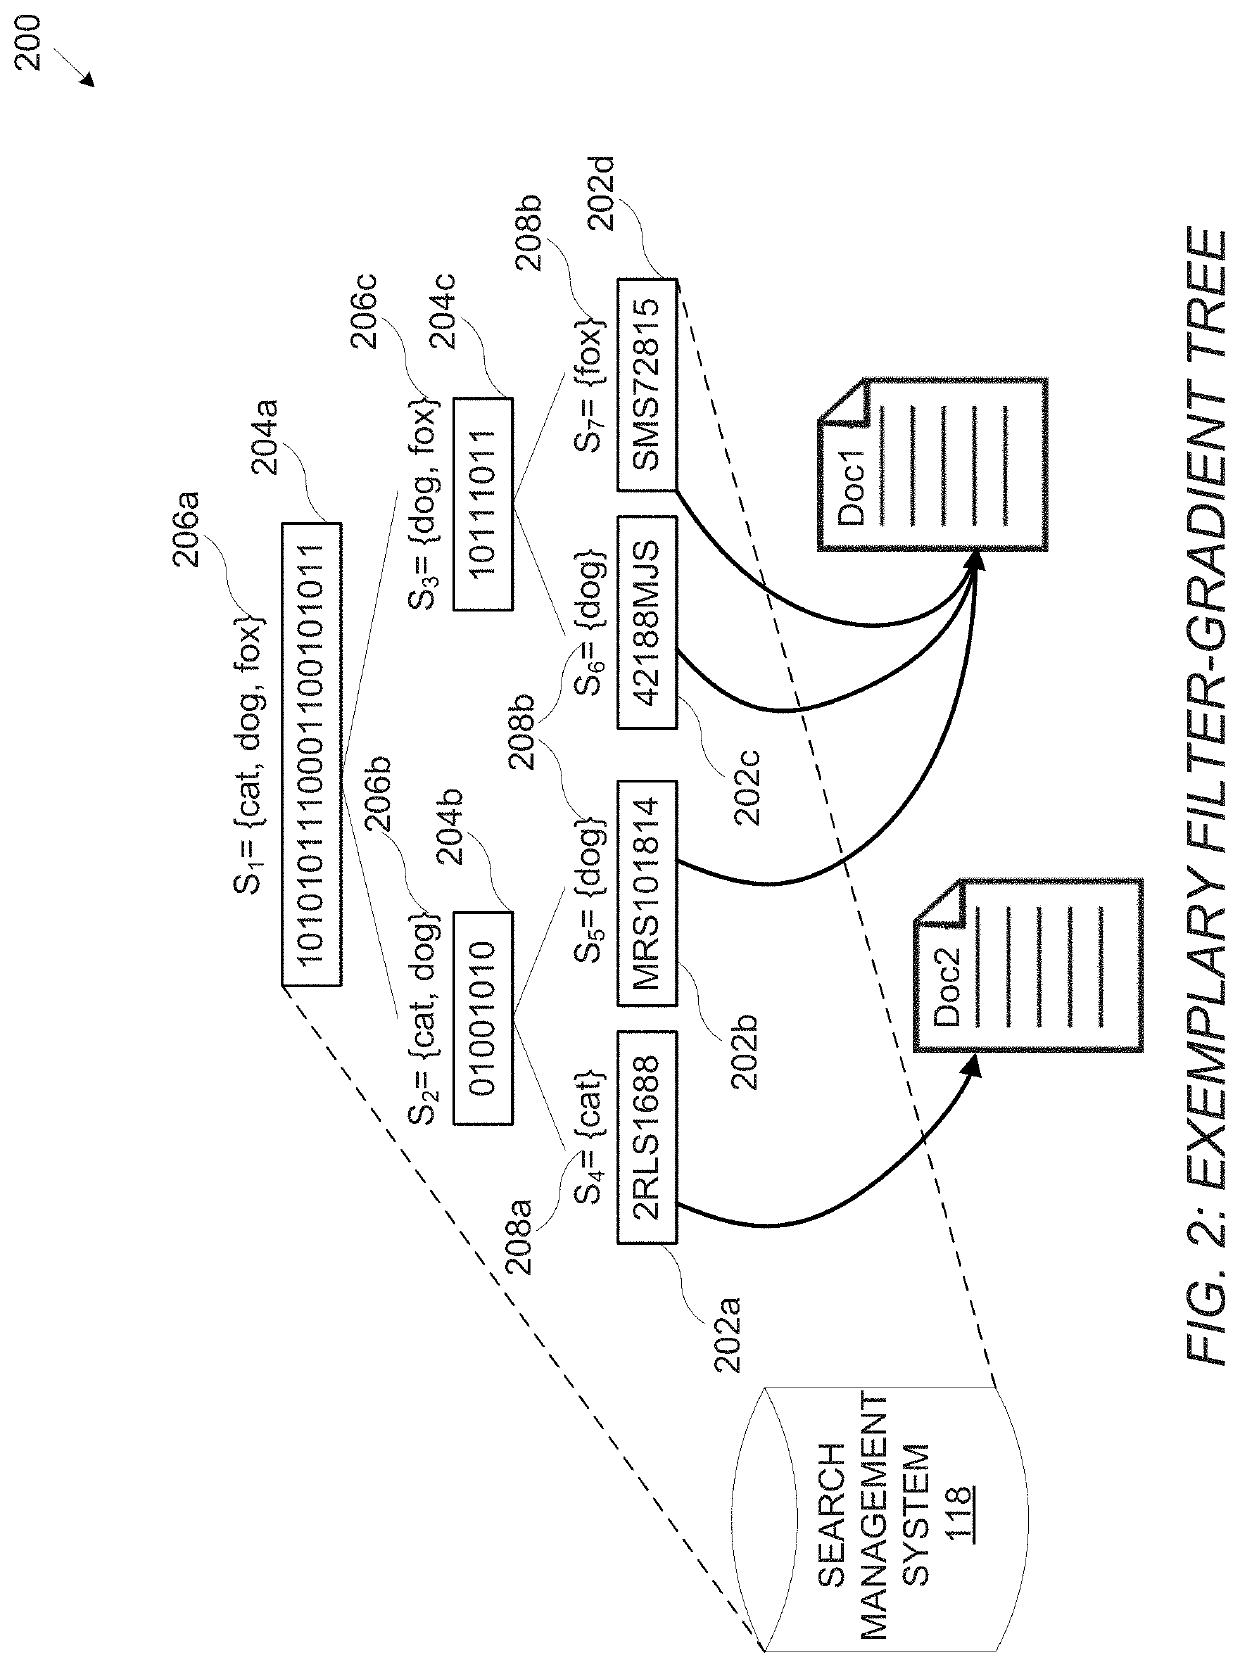 Systems and methods for generation of secure indexes for cryptographically-secure queries